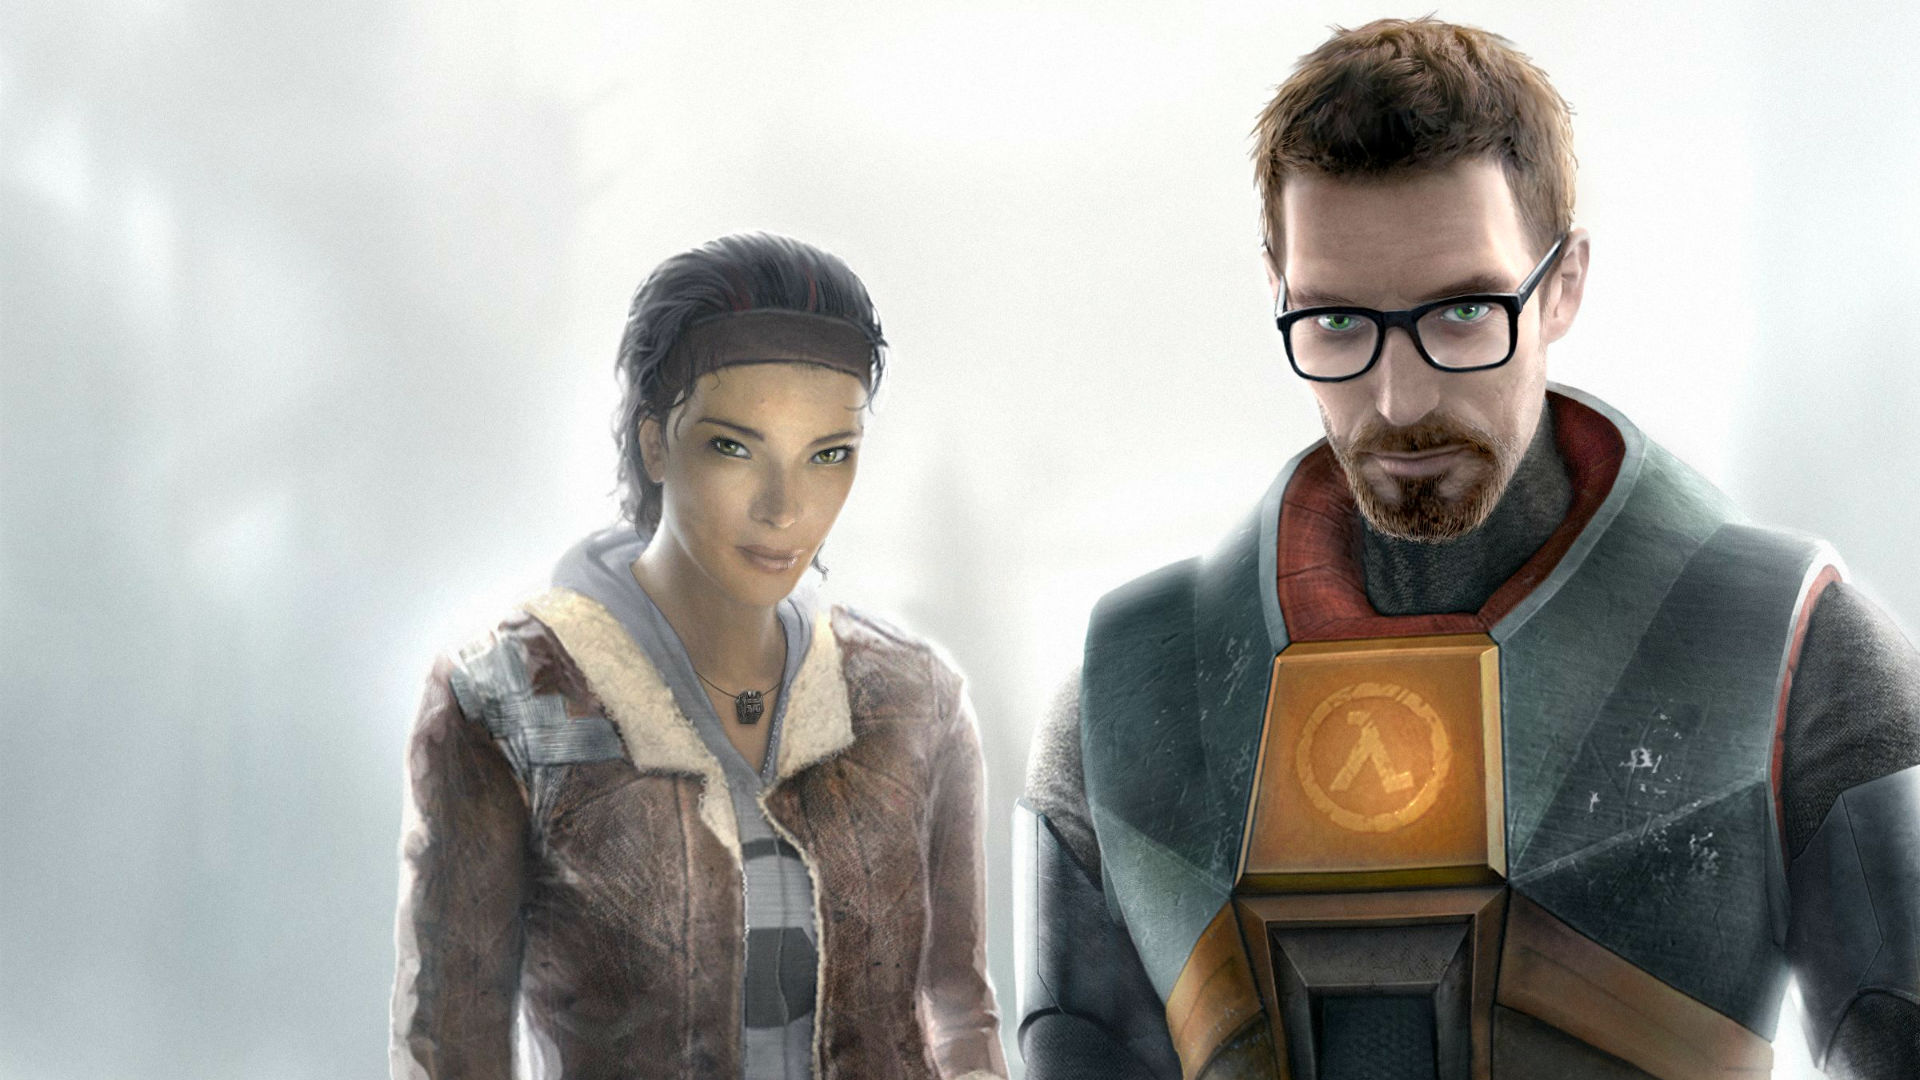 Half-Life series is free-to-play until Half-Life: Alyx releases